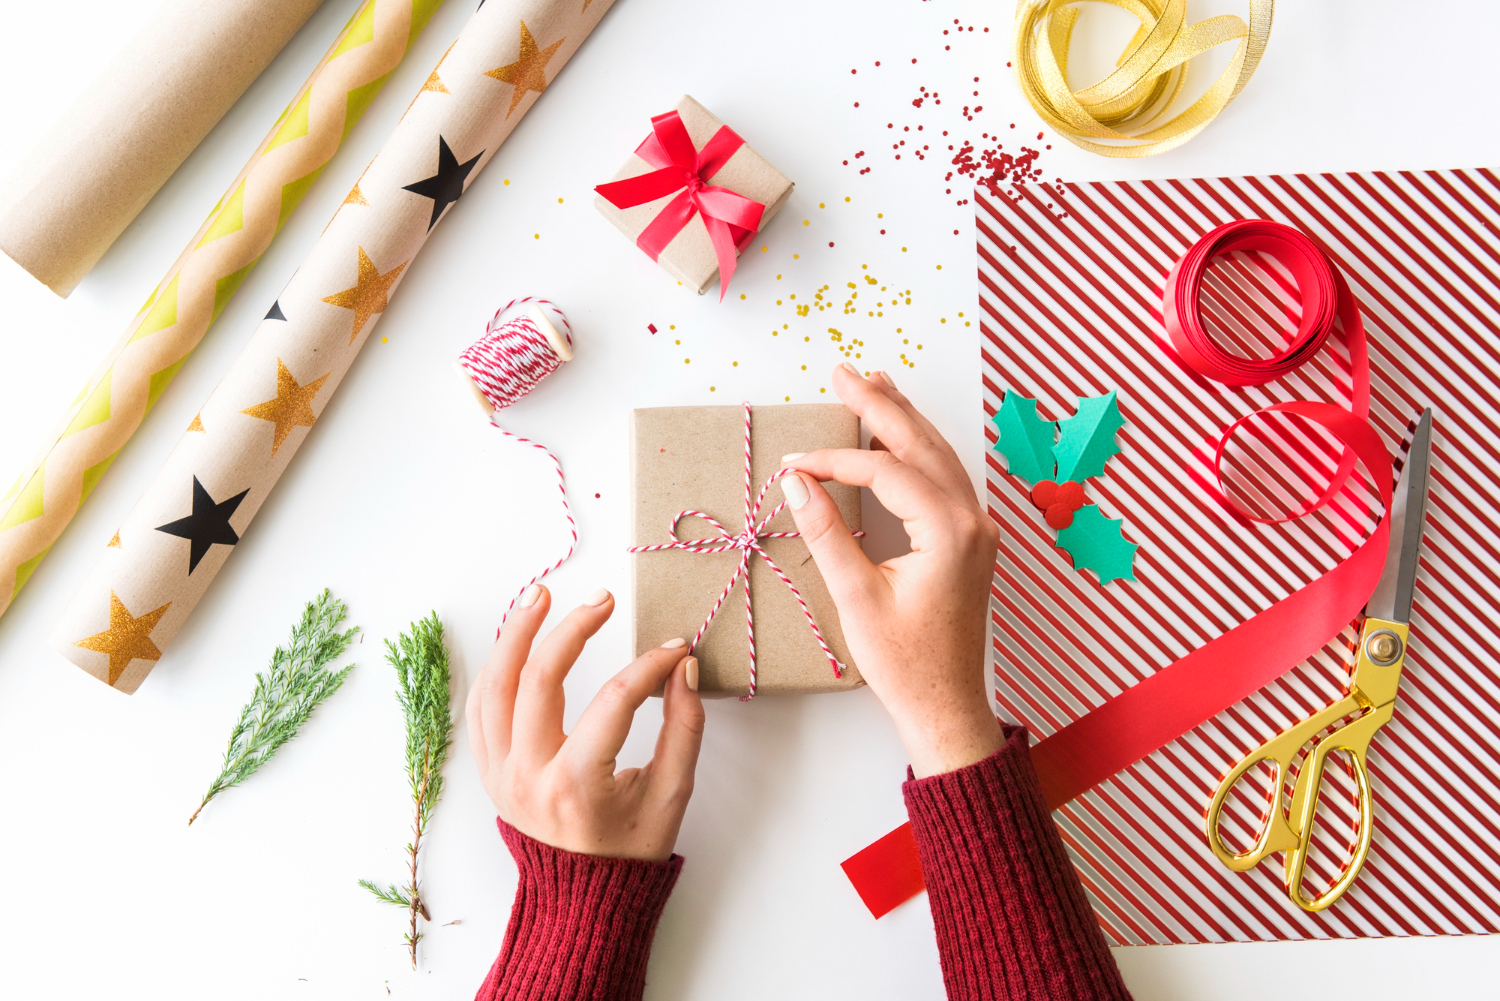 Handmade Christmas Gifts: DIY Ideas for a Personal Touch